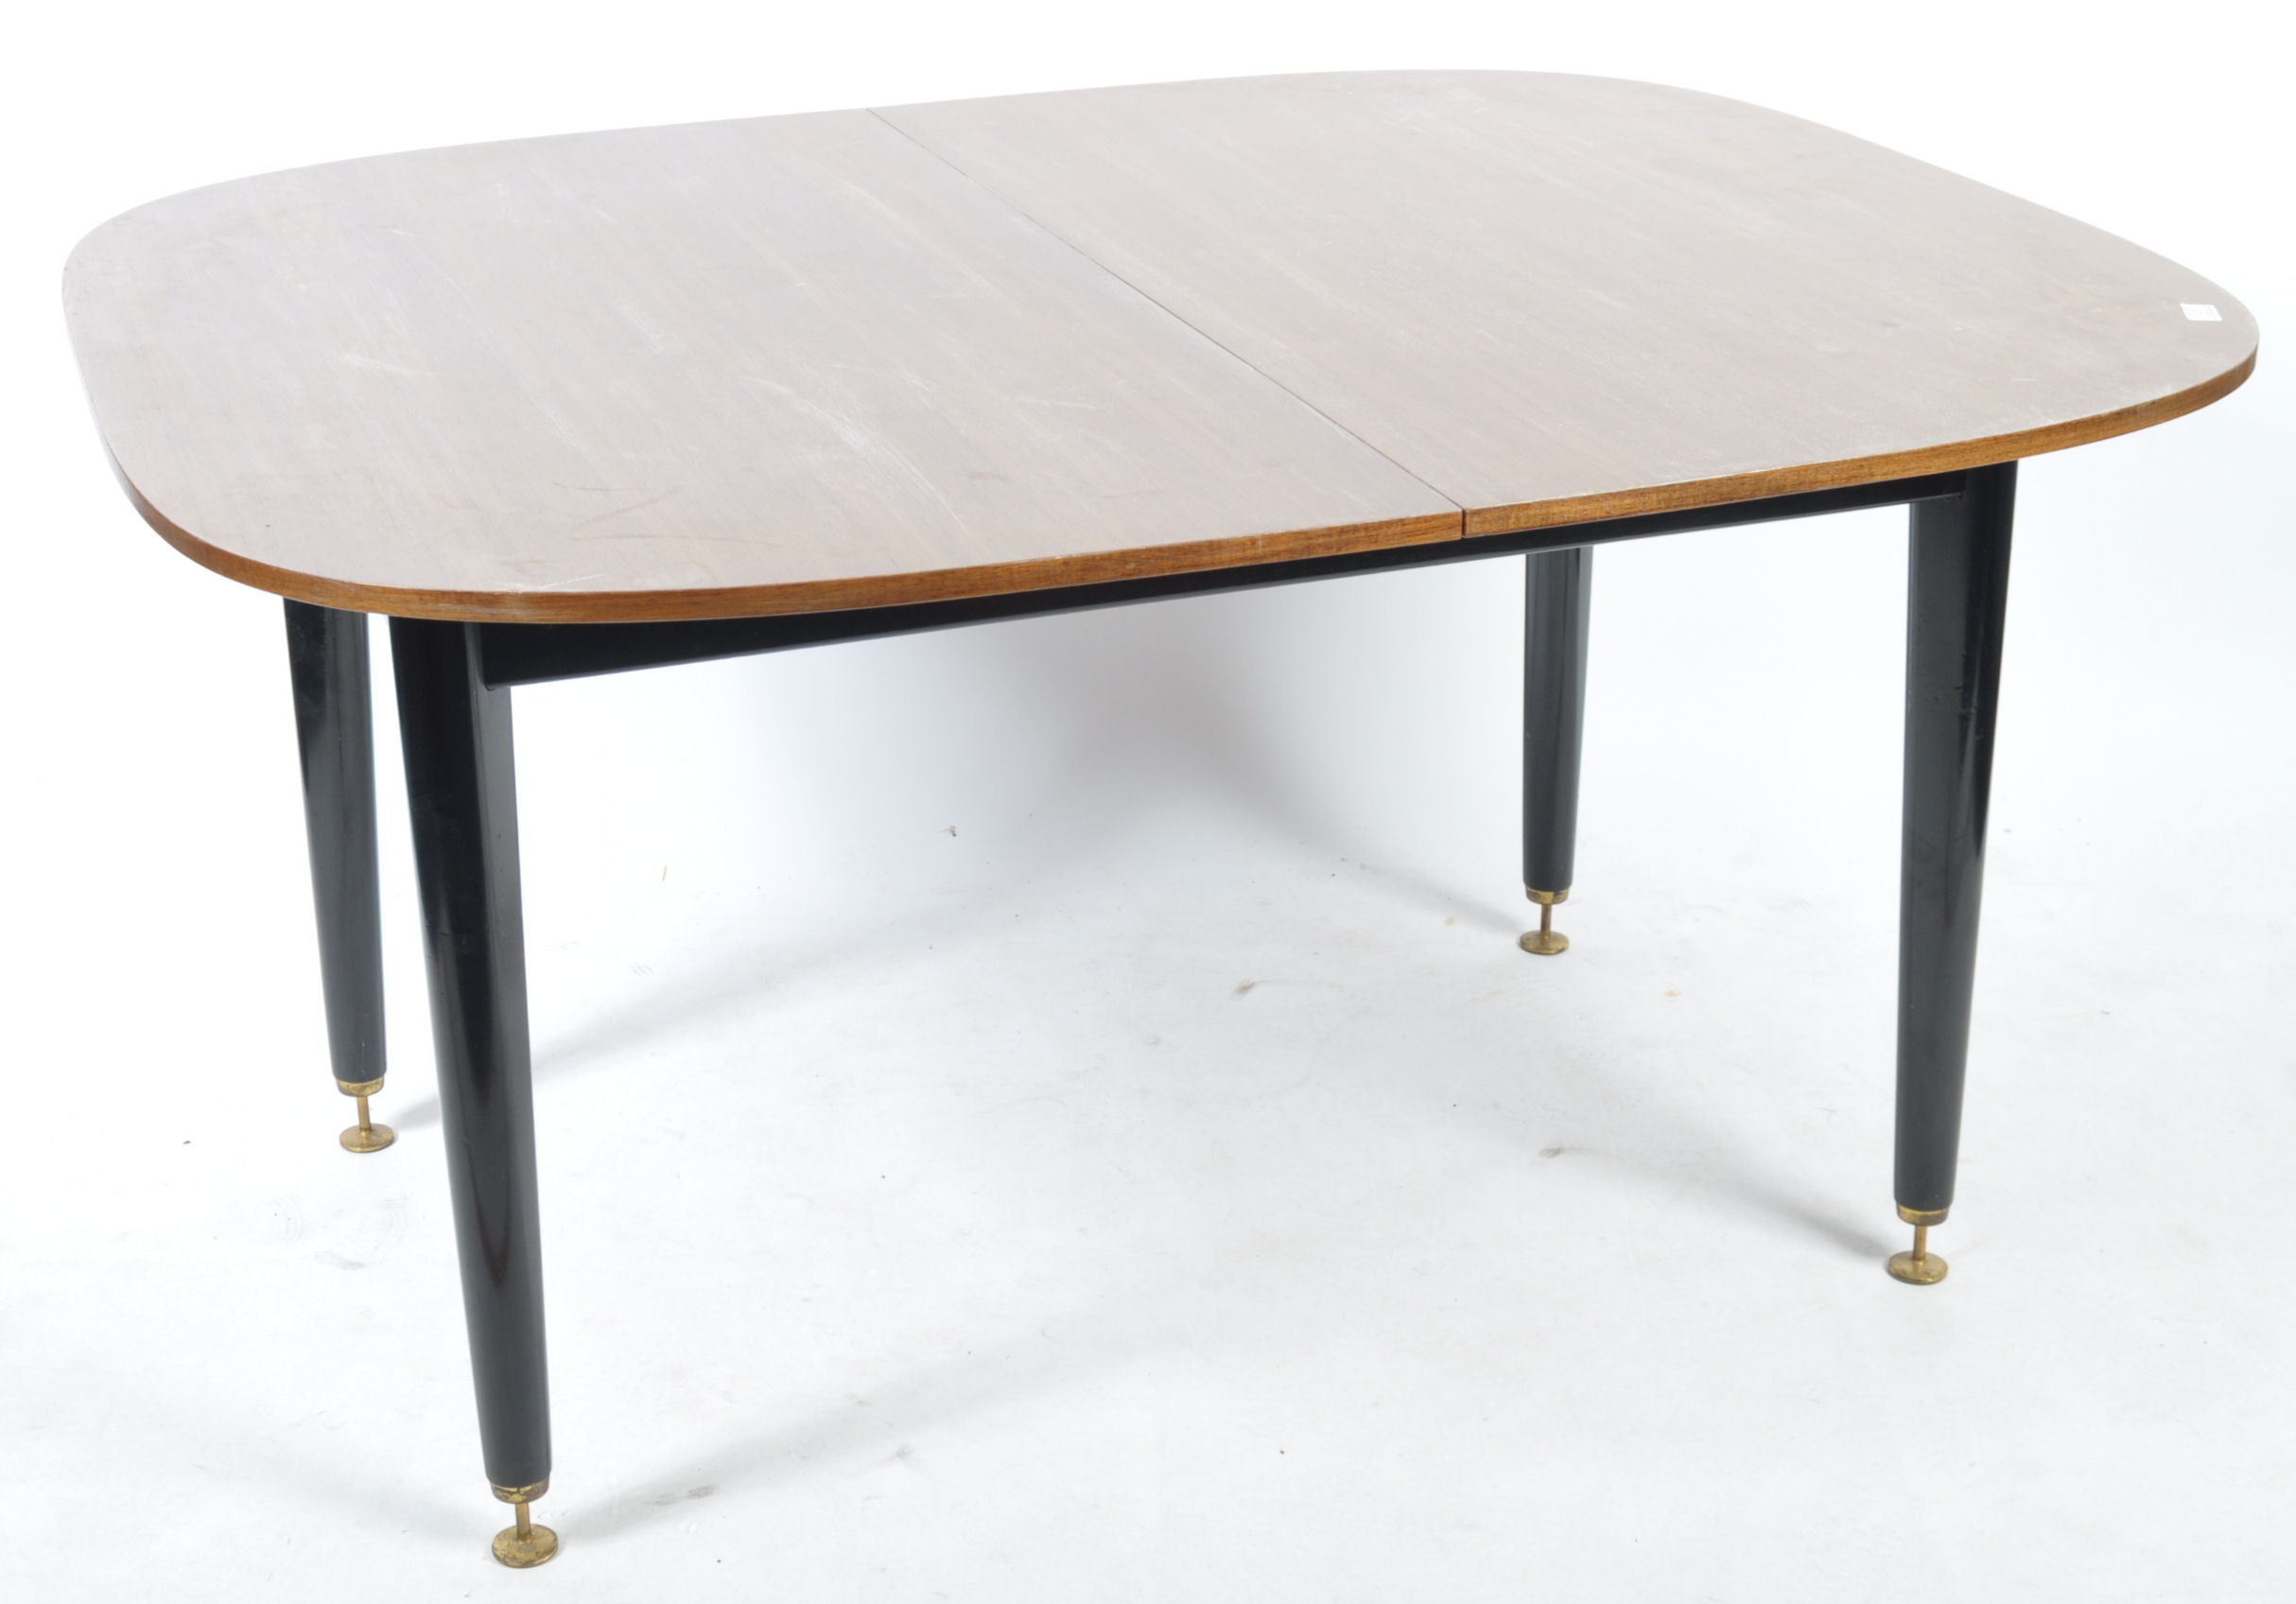 ERNEST GOMME FOR G-PLAN LIBRENZA PATTERN DINING TABLE - Image 2 of 5